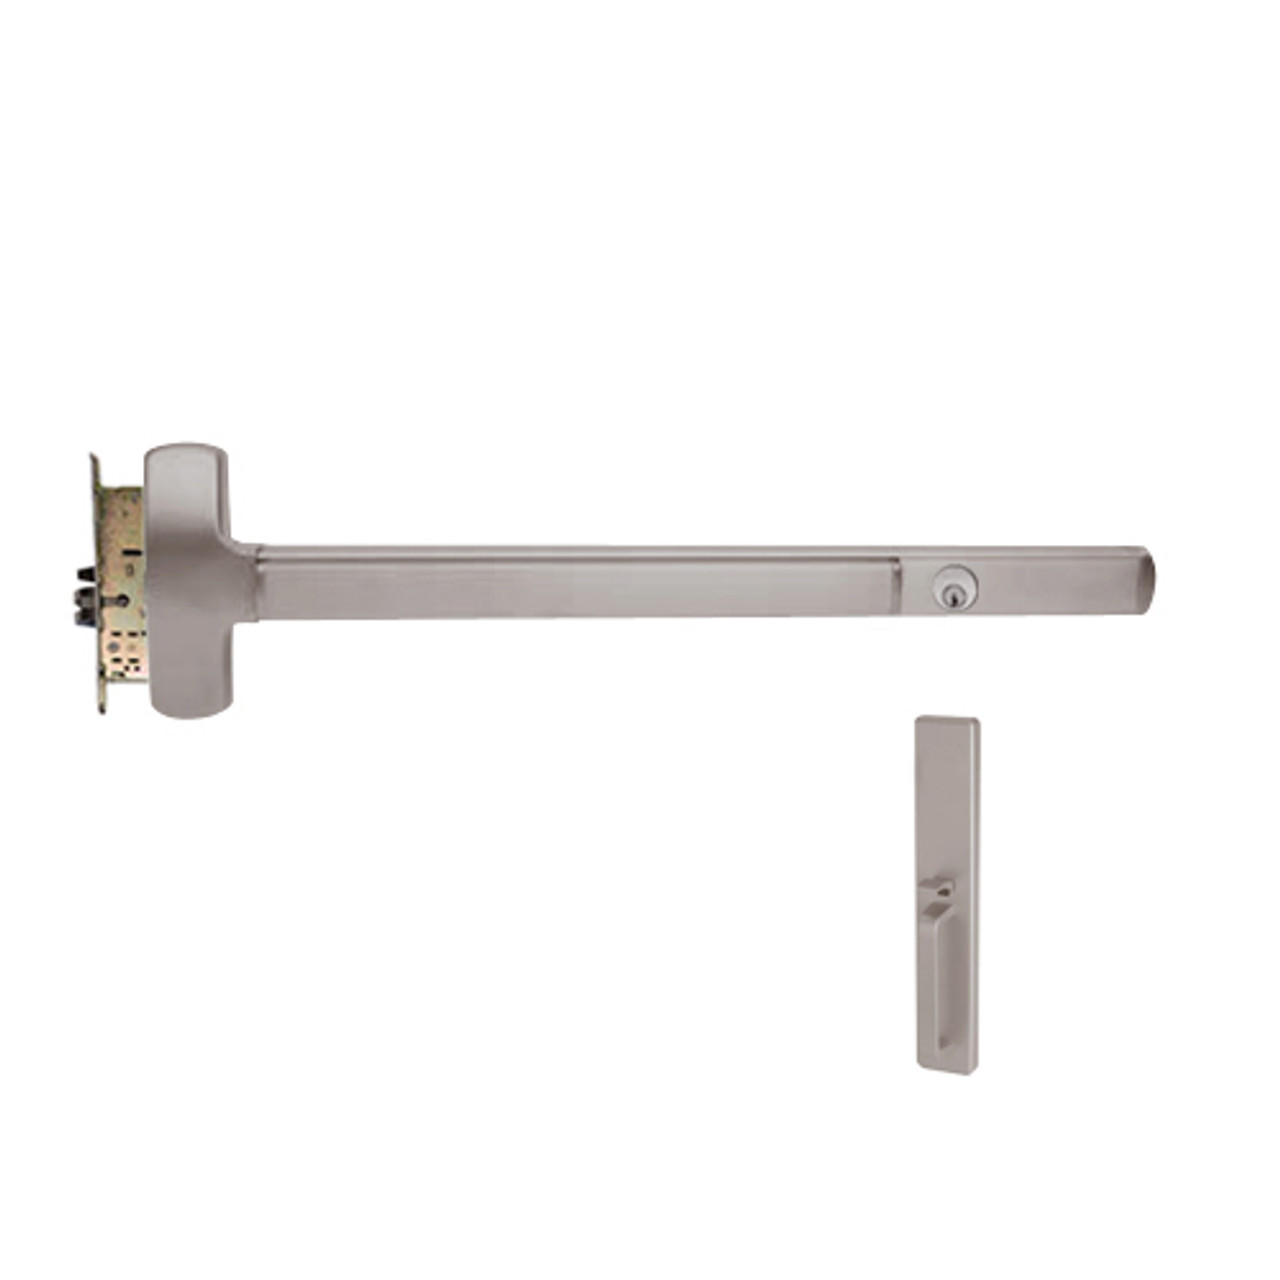 CD25-M-TP-BE-US28-4-RHR Falcon Exit Device in Anodized Aluminum